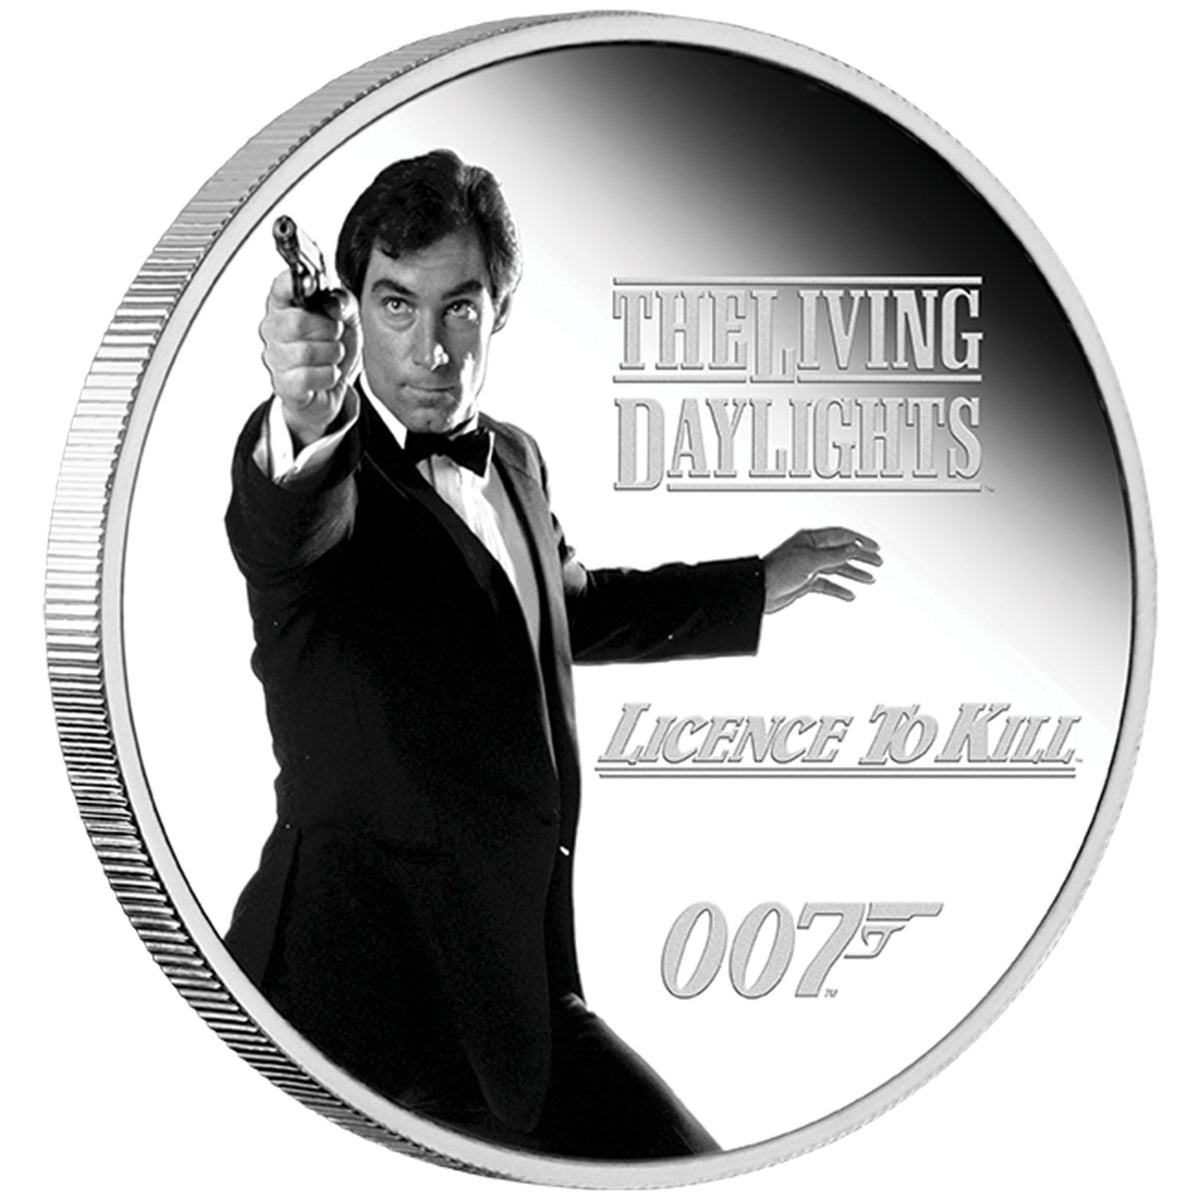 James Bond Timothy Dalton 1oz Silver Proof Coin - Numbered Edition - By The Perth Mint